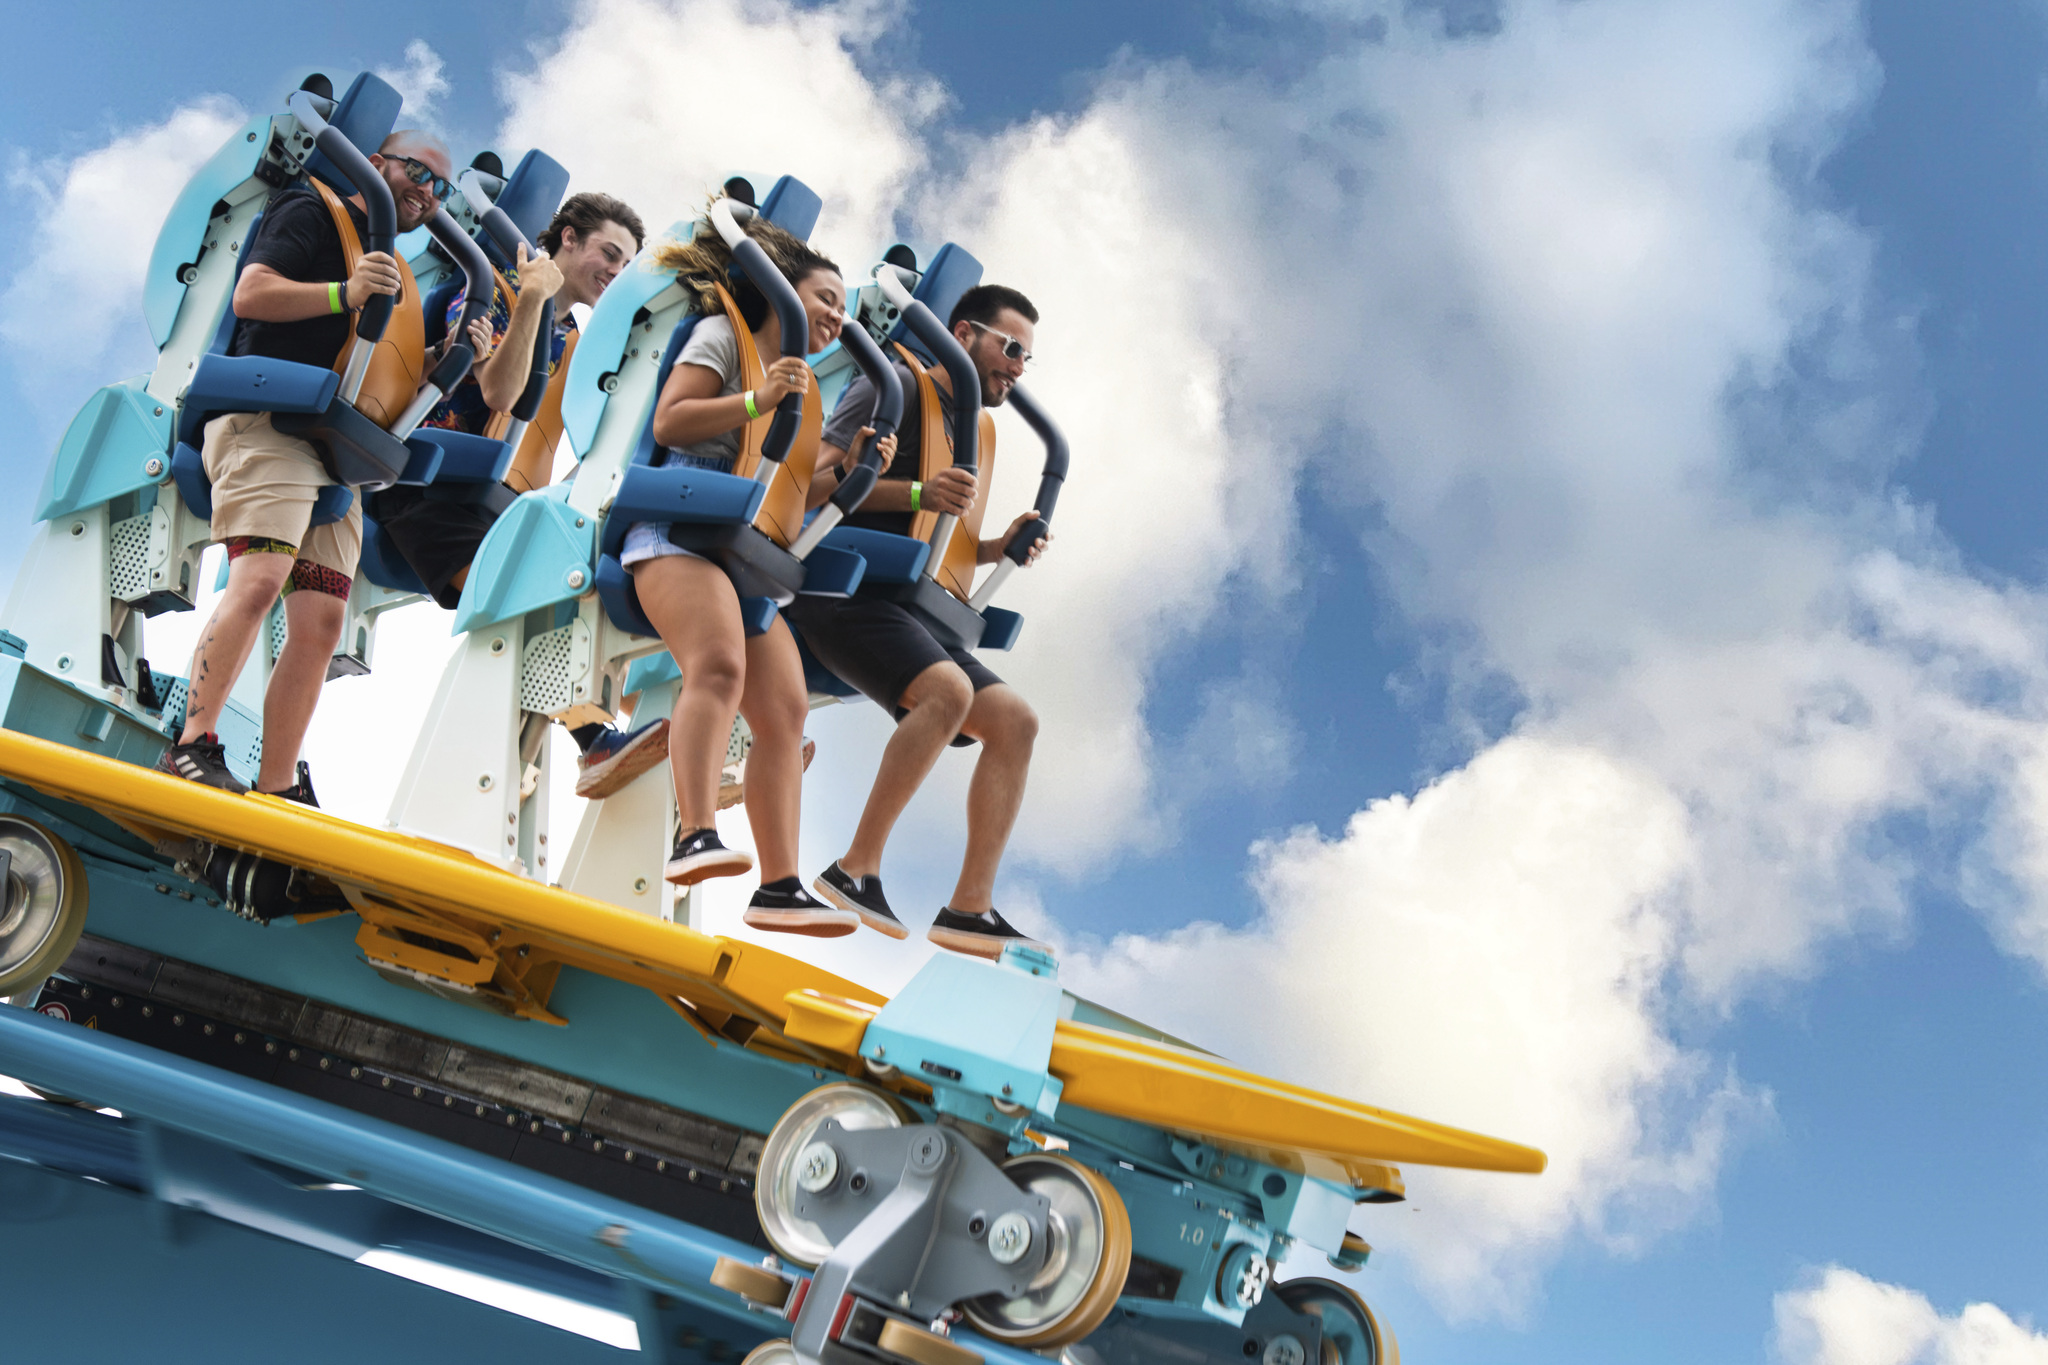 Pipeline: The Surf Coaster now open at SeaWorld Orlando